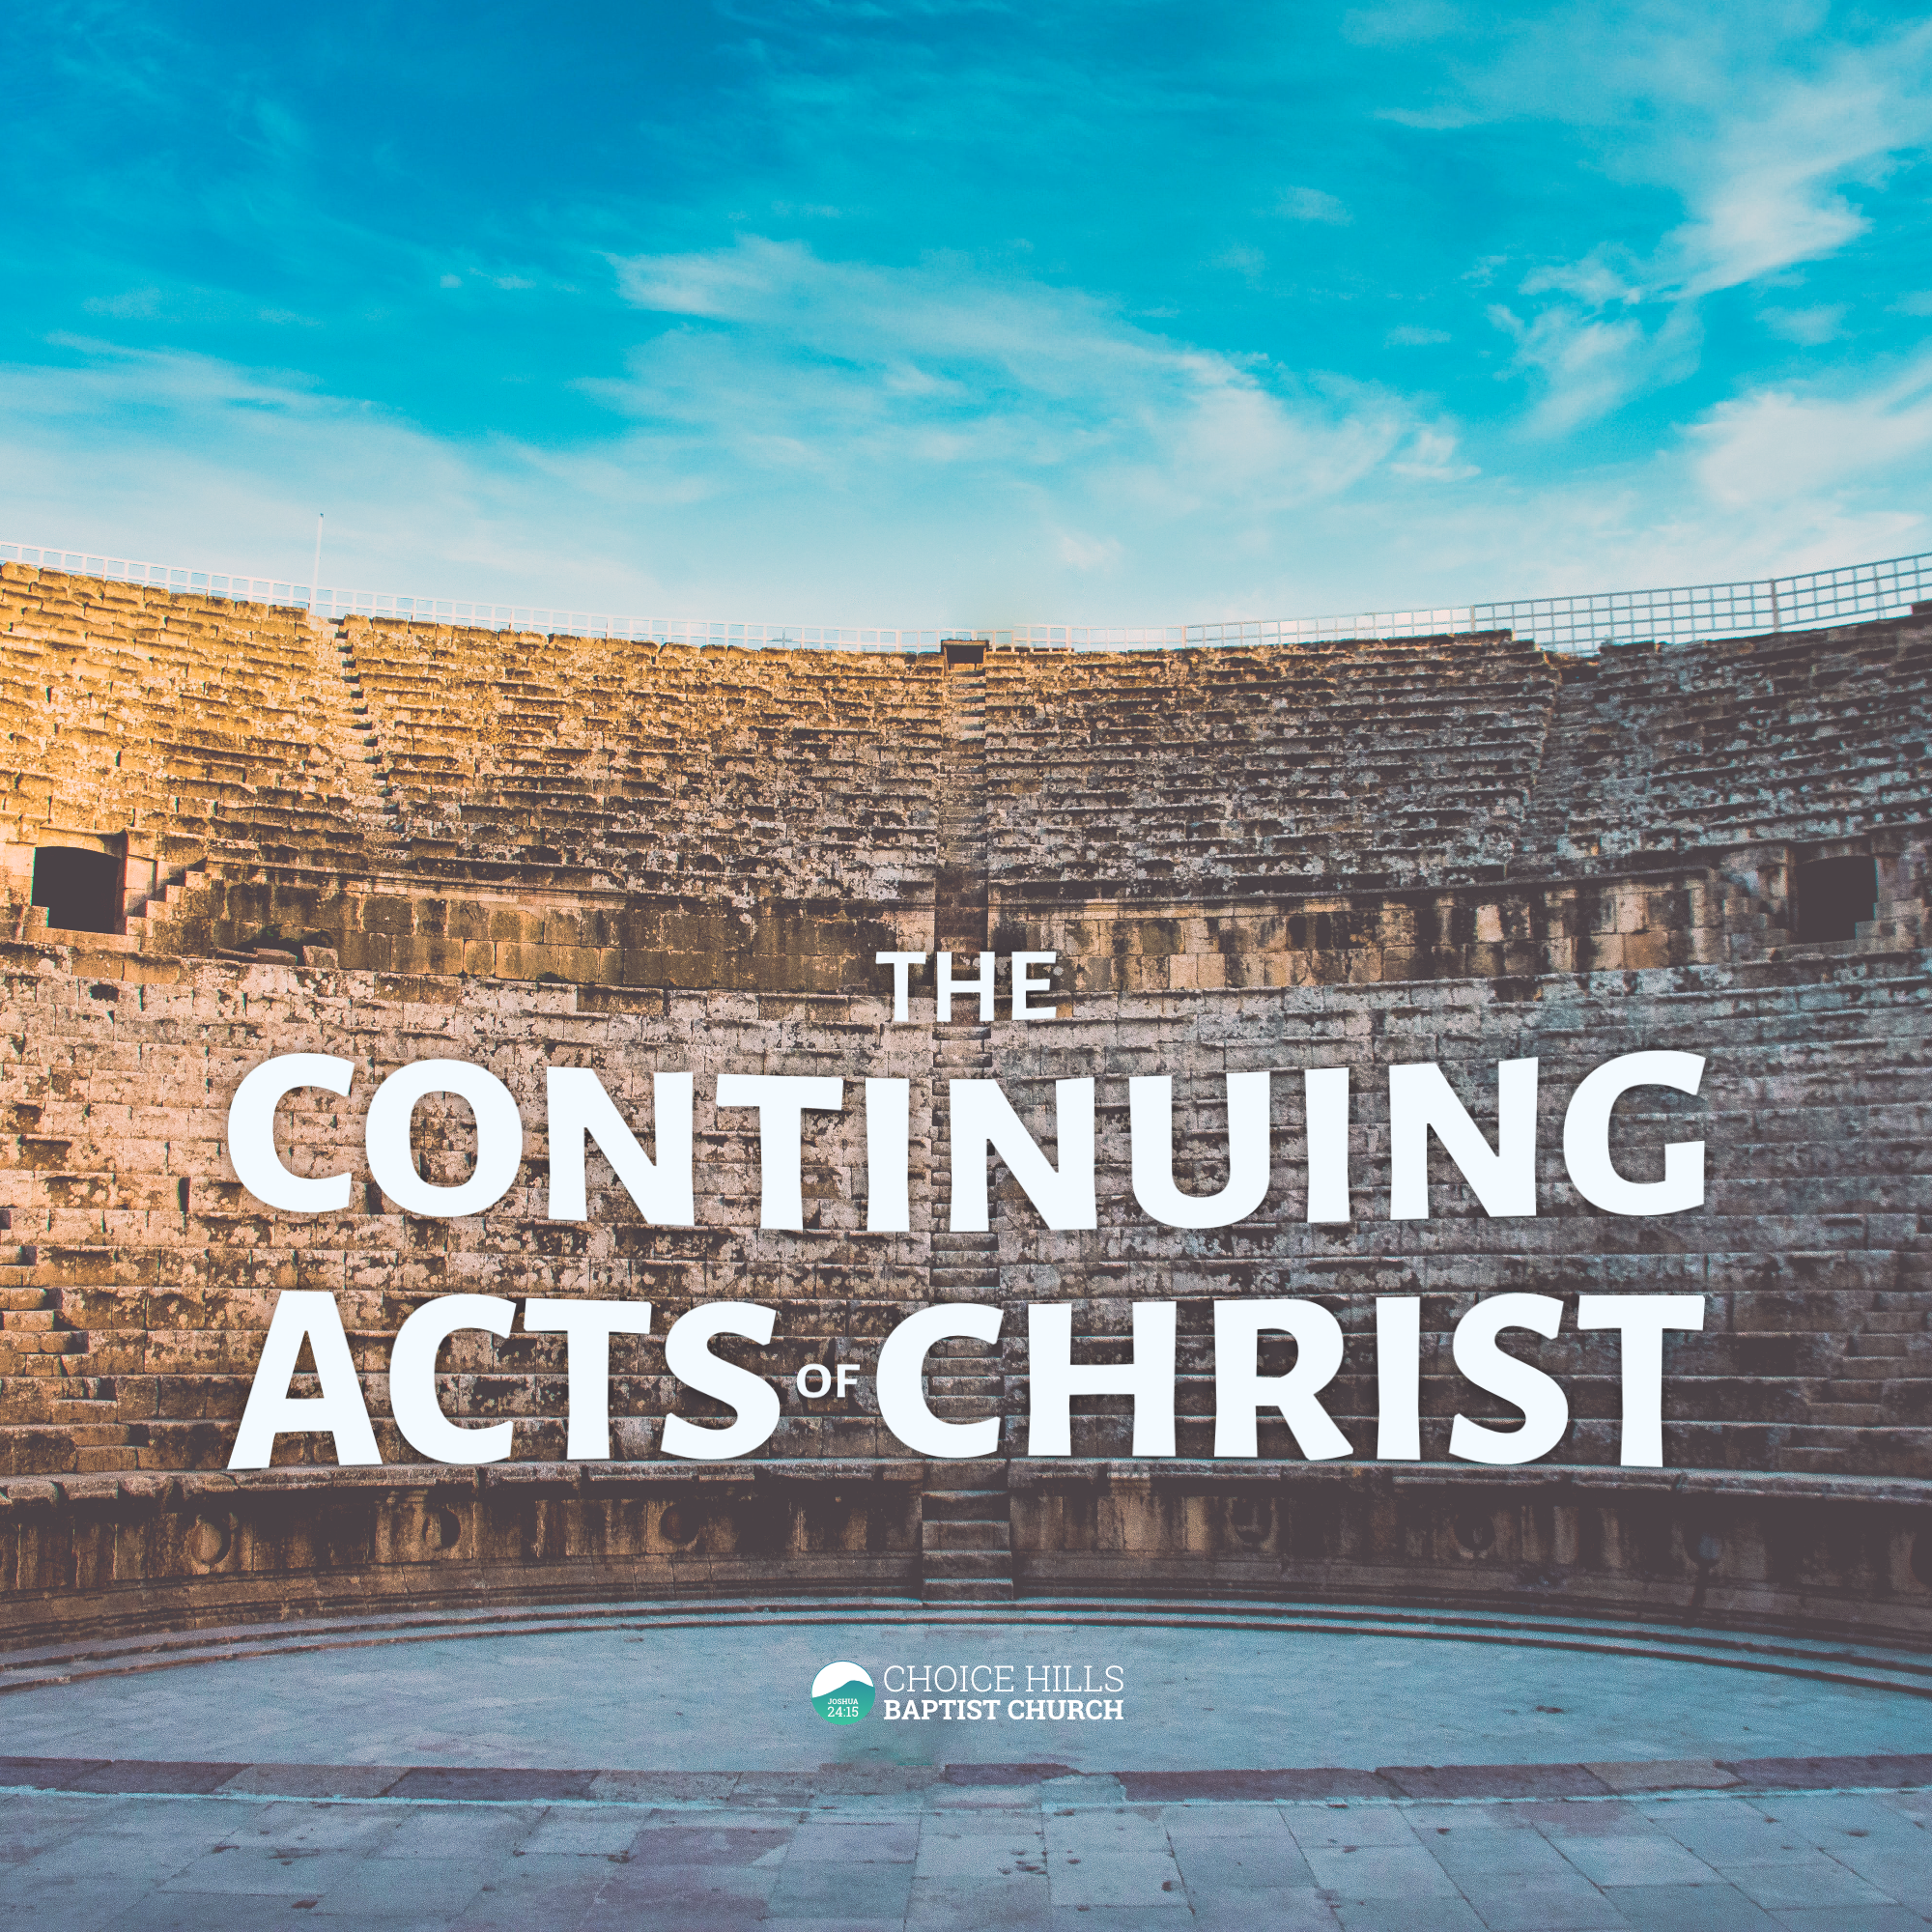 Believer's Baptism—A Biblical Practice: The Continuing Acts of Christ—A Study of the Book of Acts